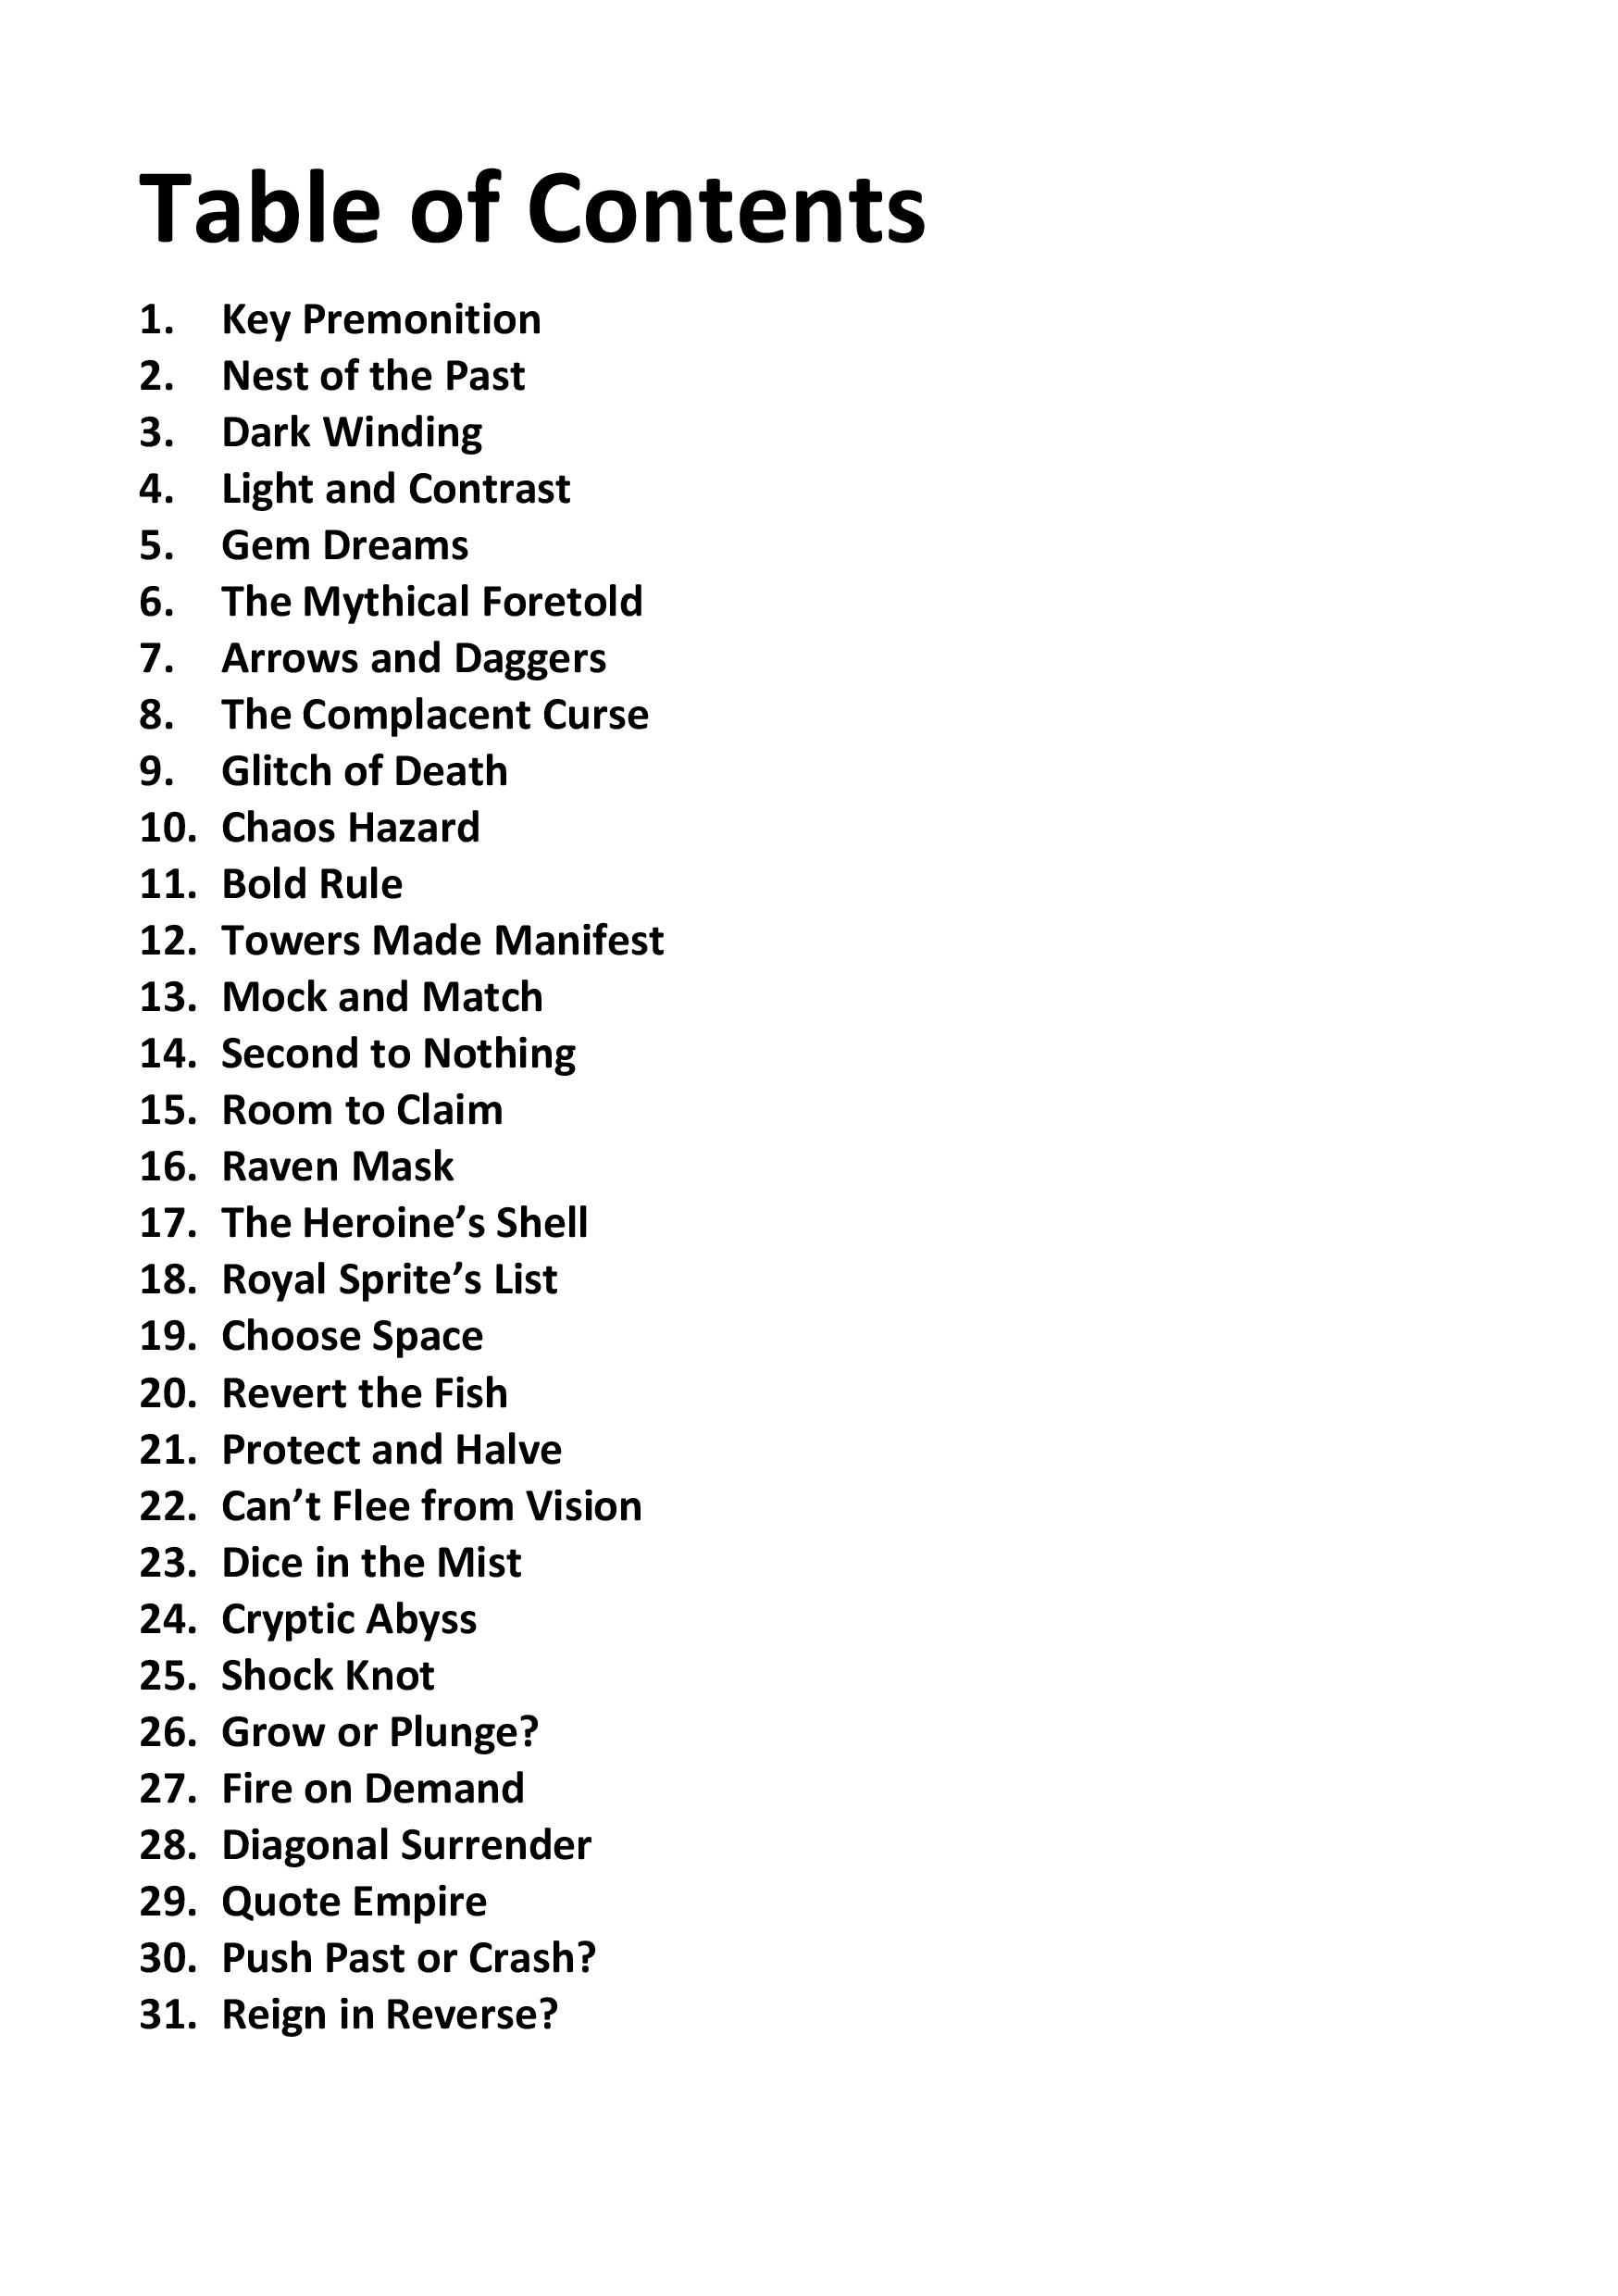 puzzles for the road (00 table of contents).jpg